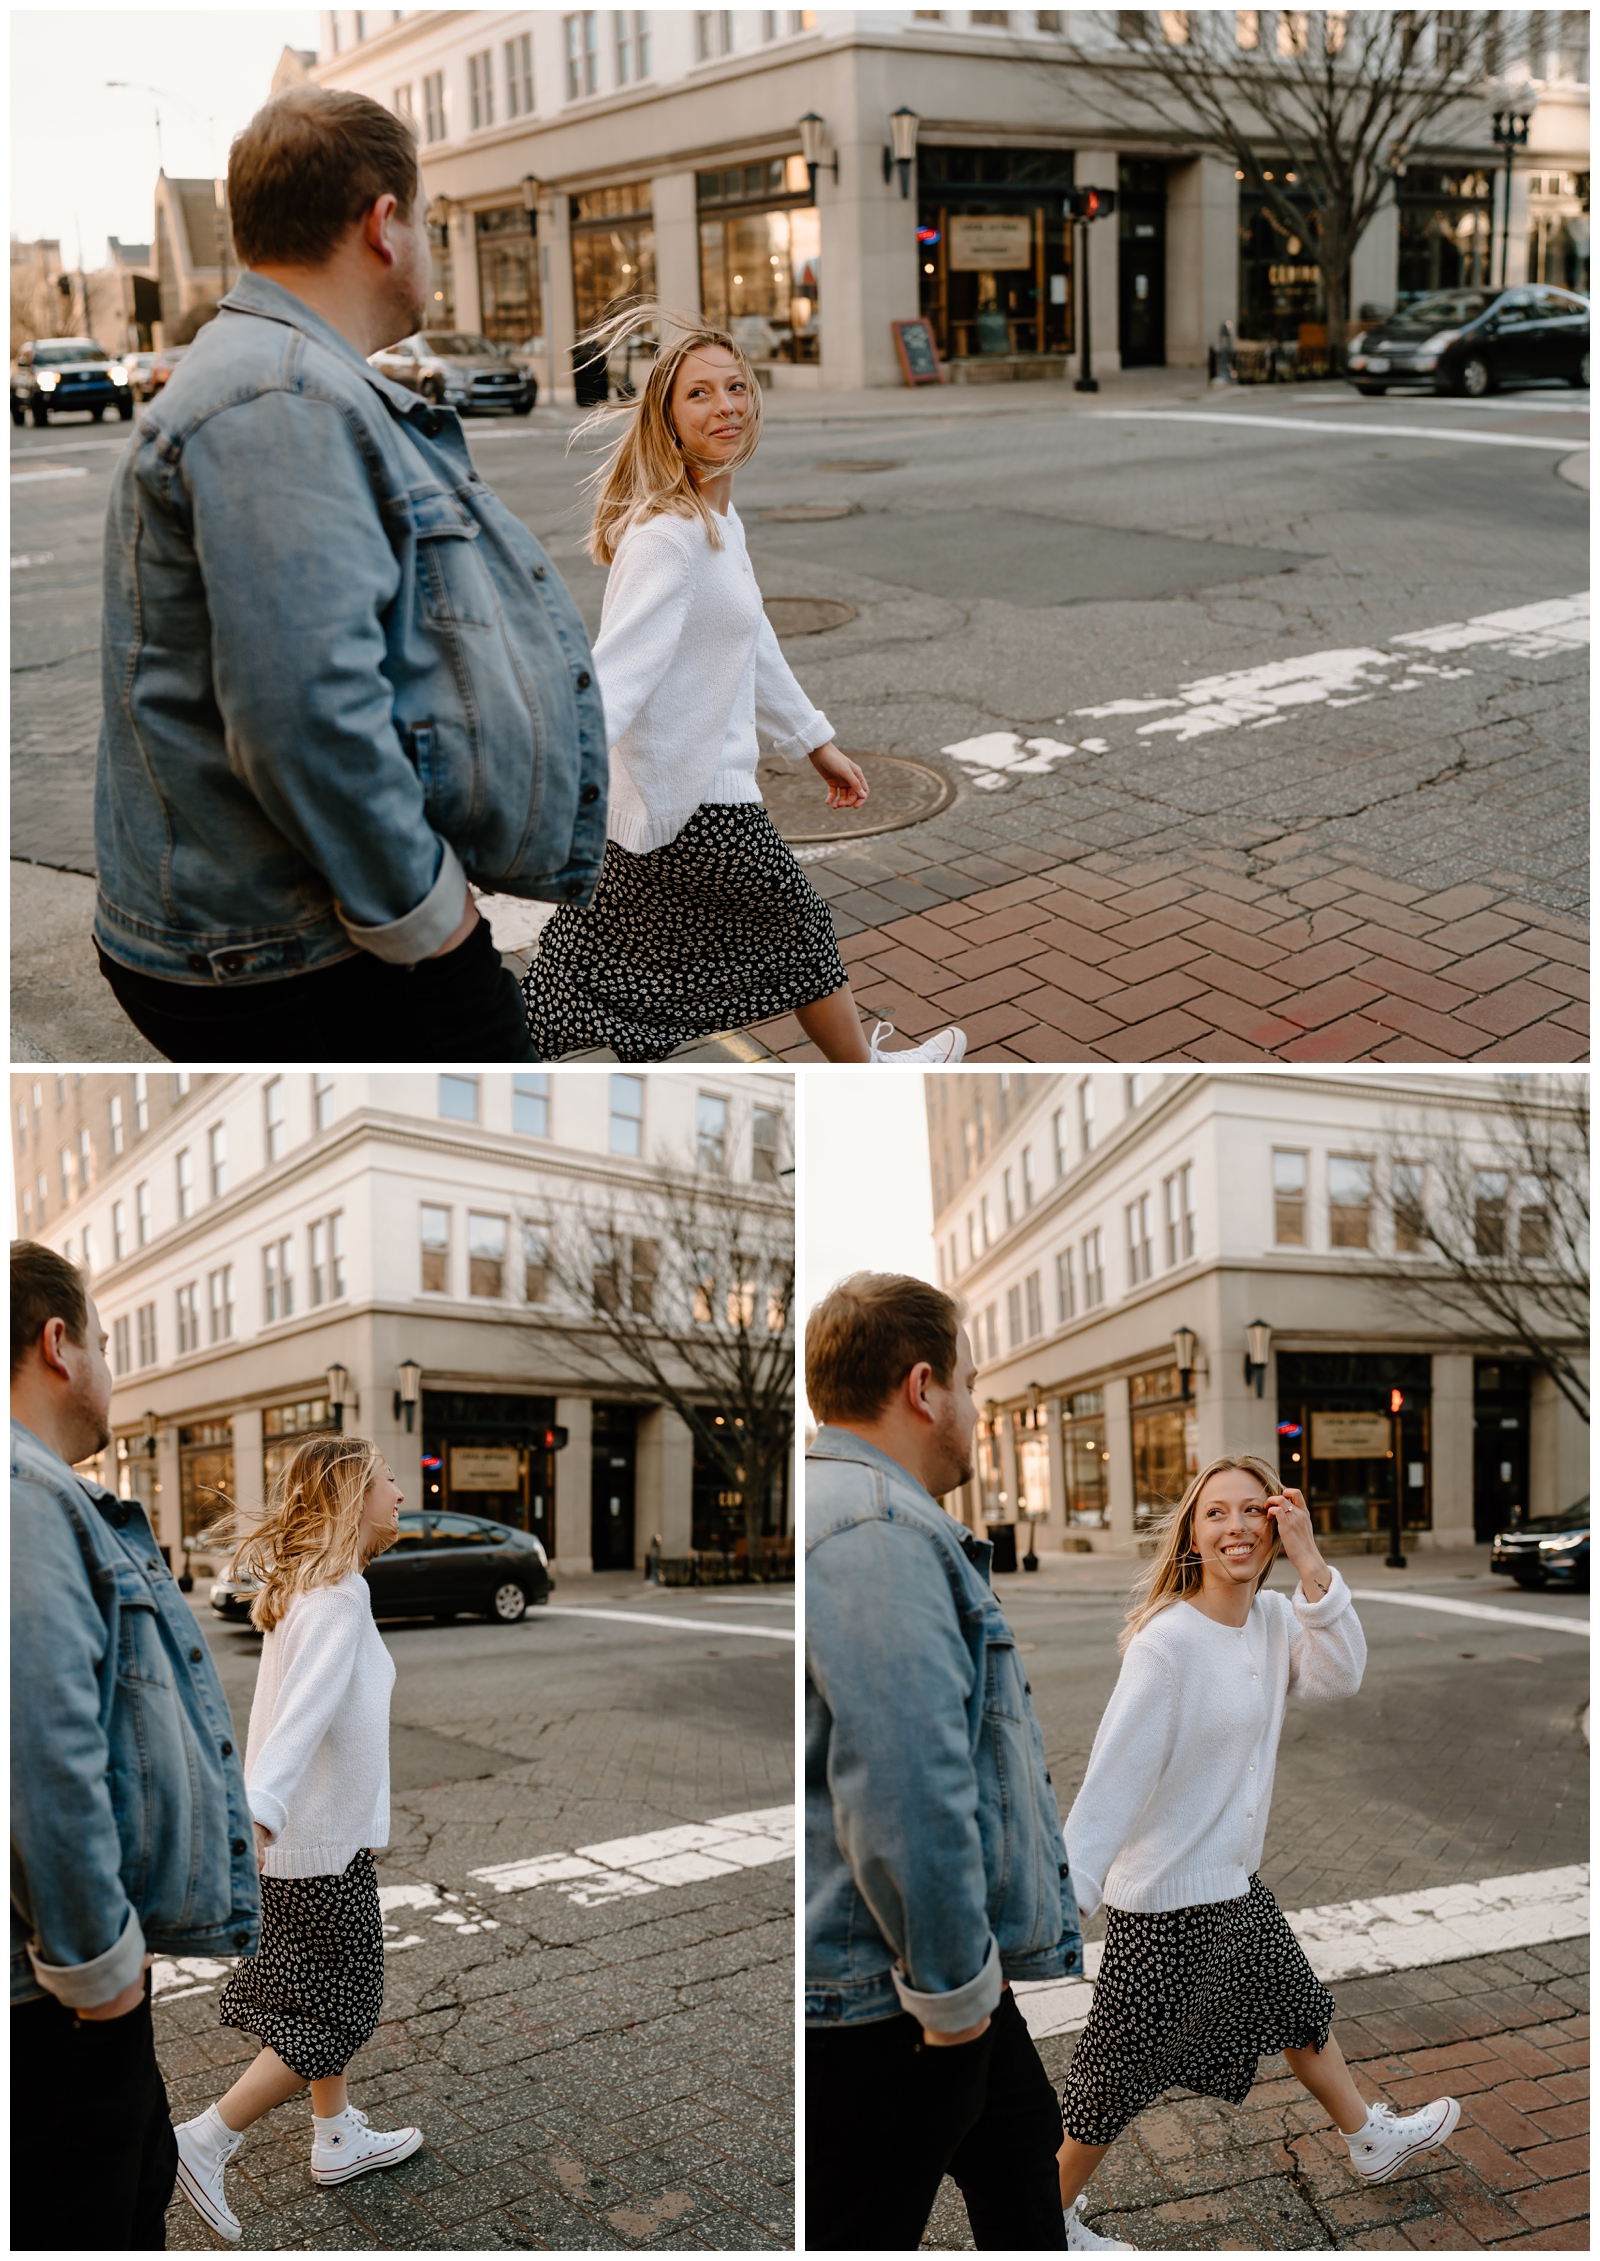 Classy windy city engagement photos in downtown Winston-Salem, NC by Greensboro wedding and elopement photographer